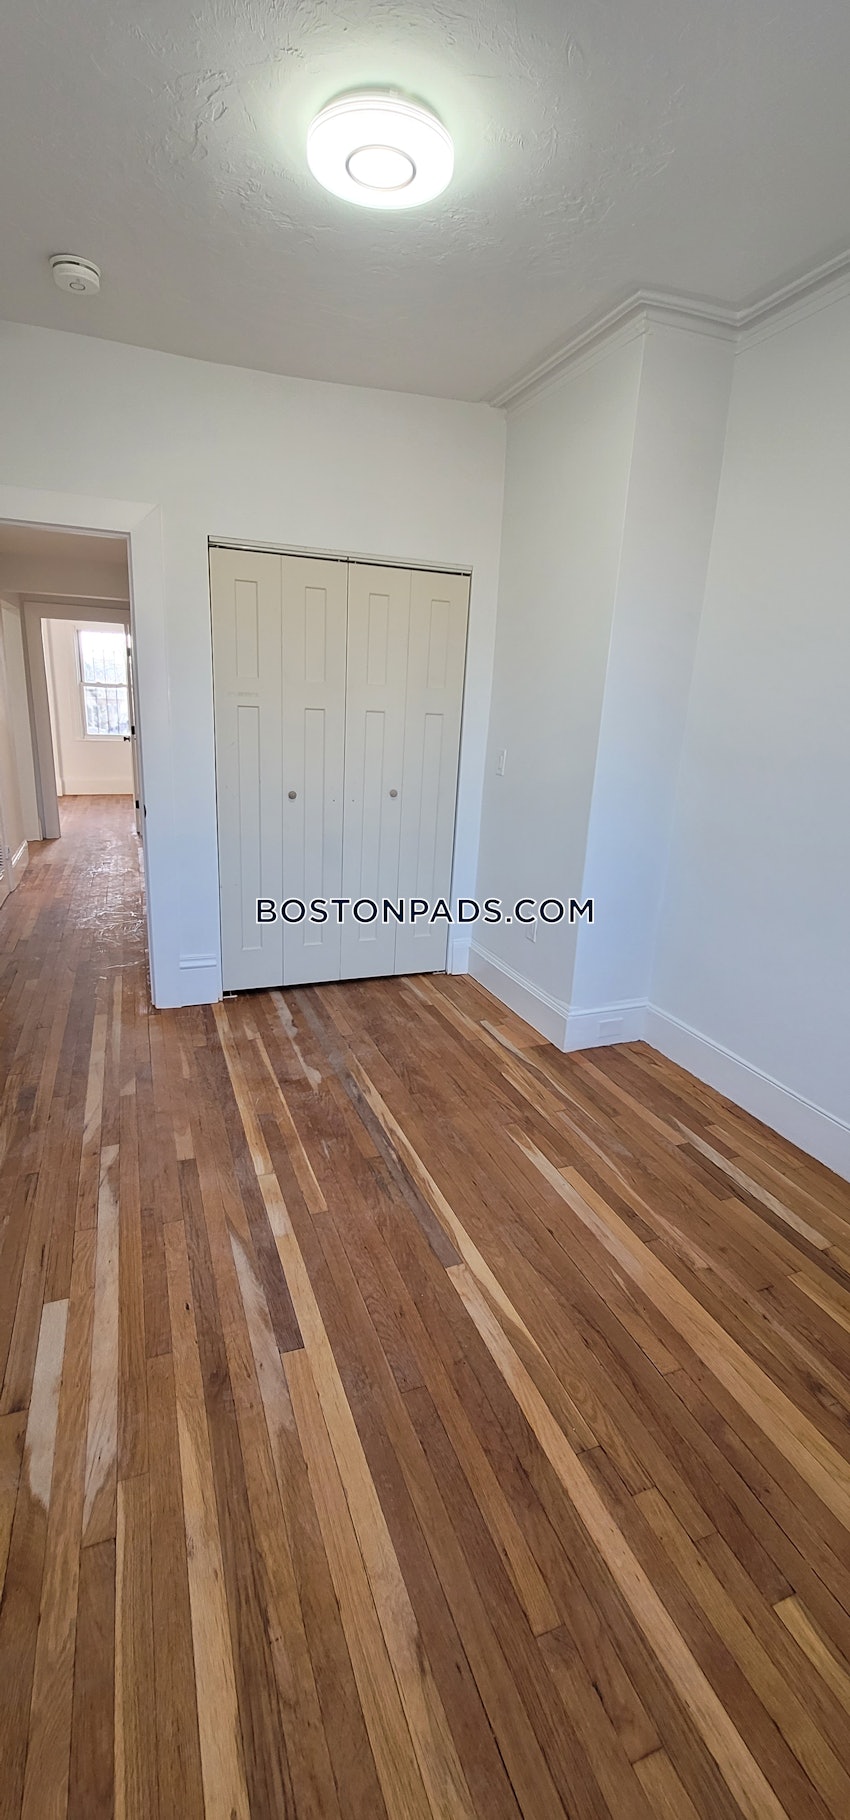 BOSTON - FORT HILL - 3 Beds, 3 Baths - Image 4